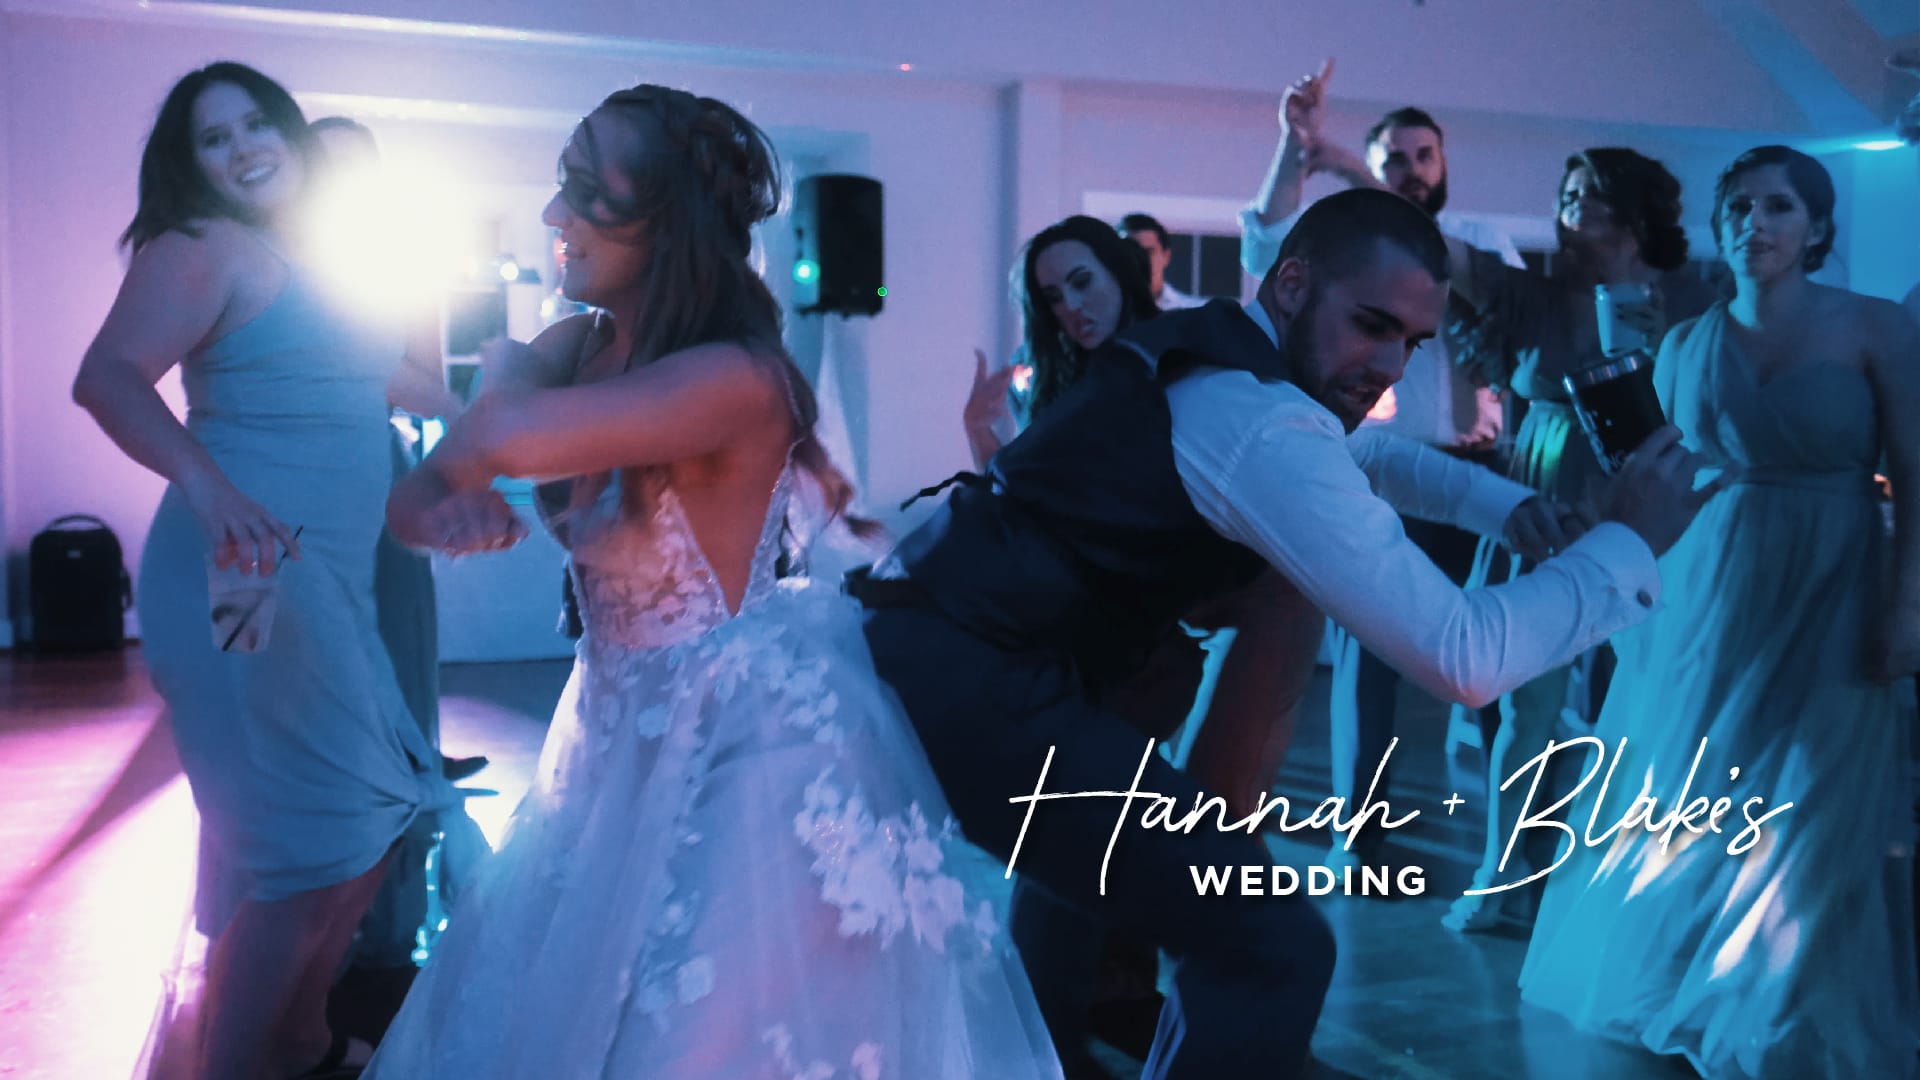 bride and groom dancing at their reception